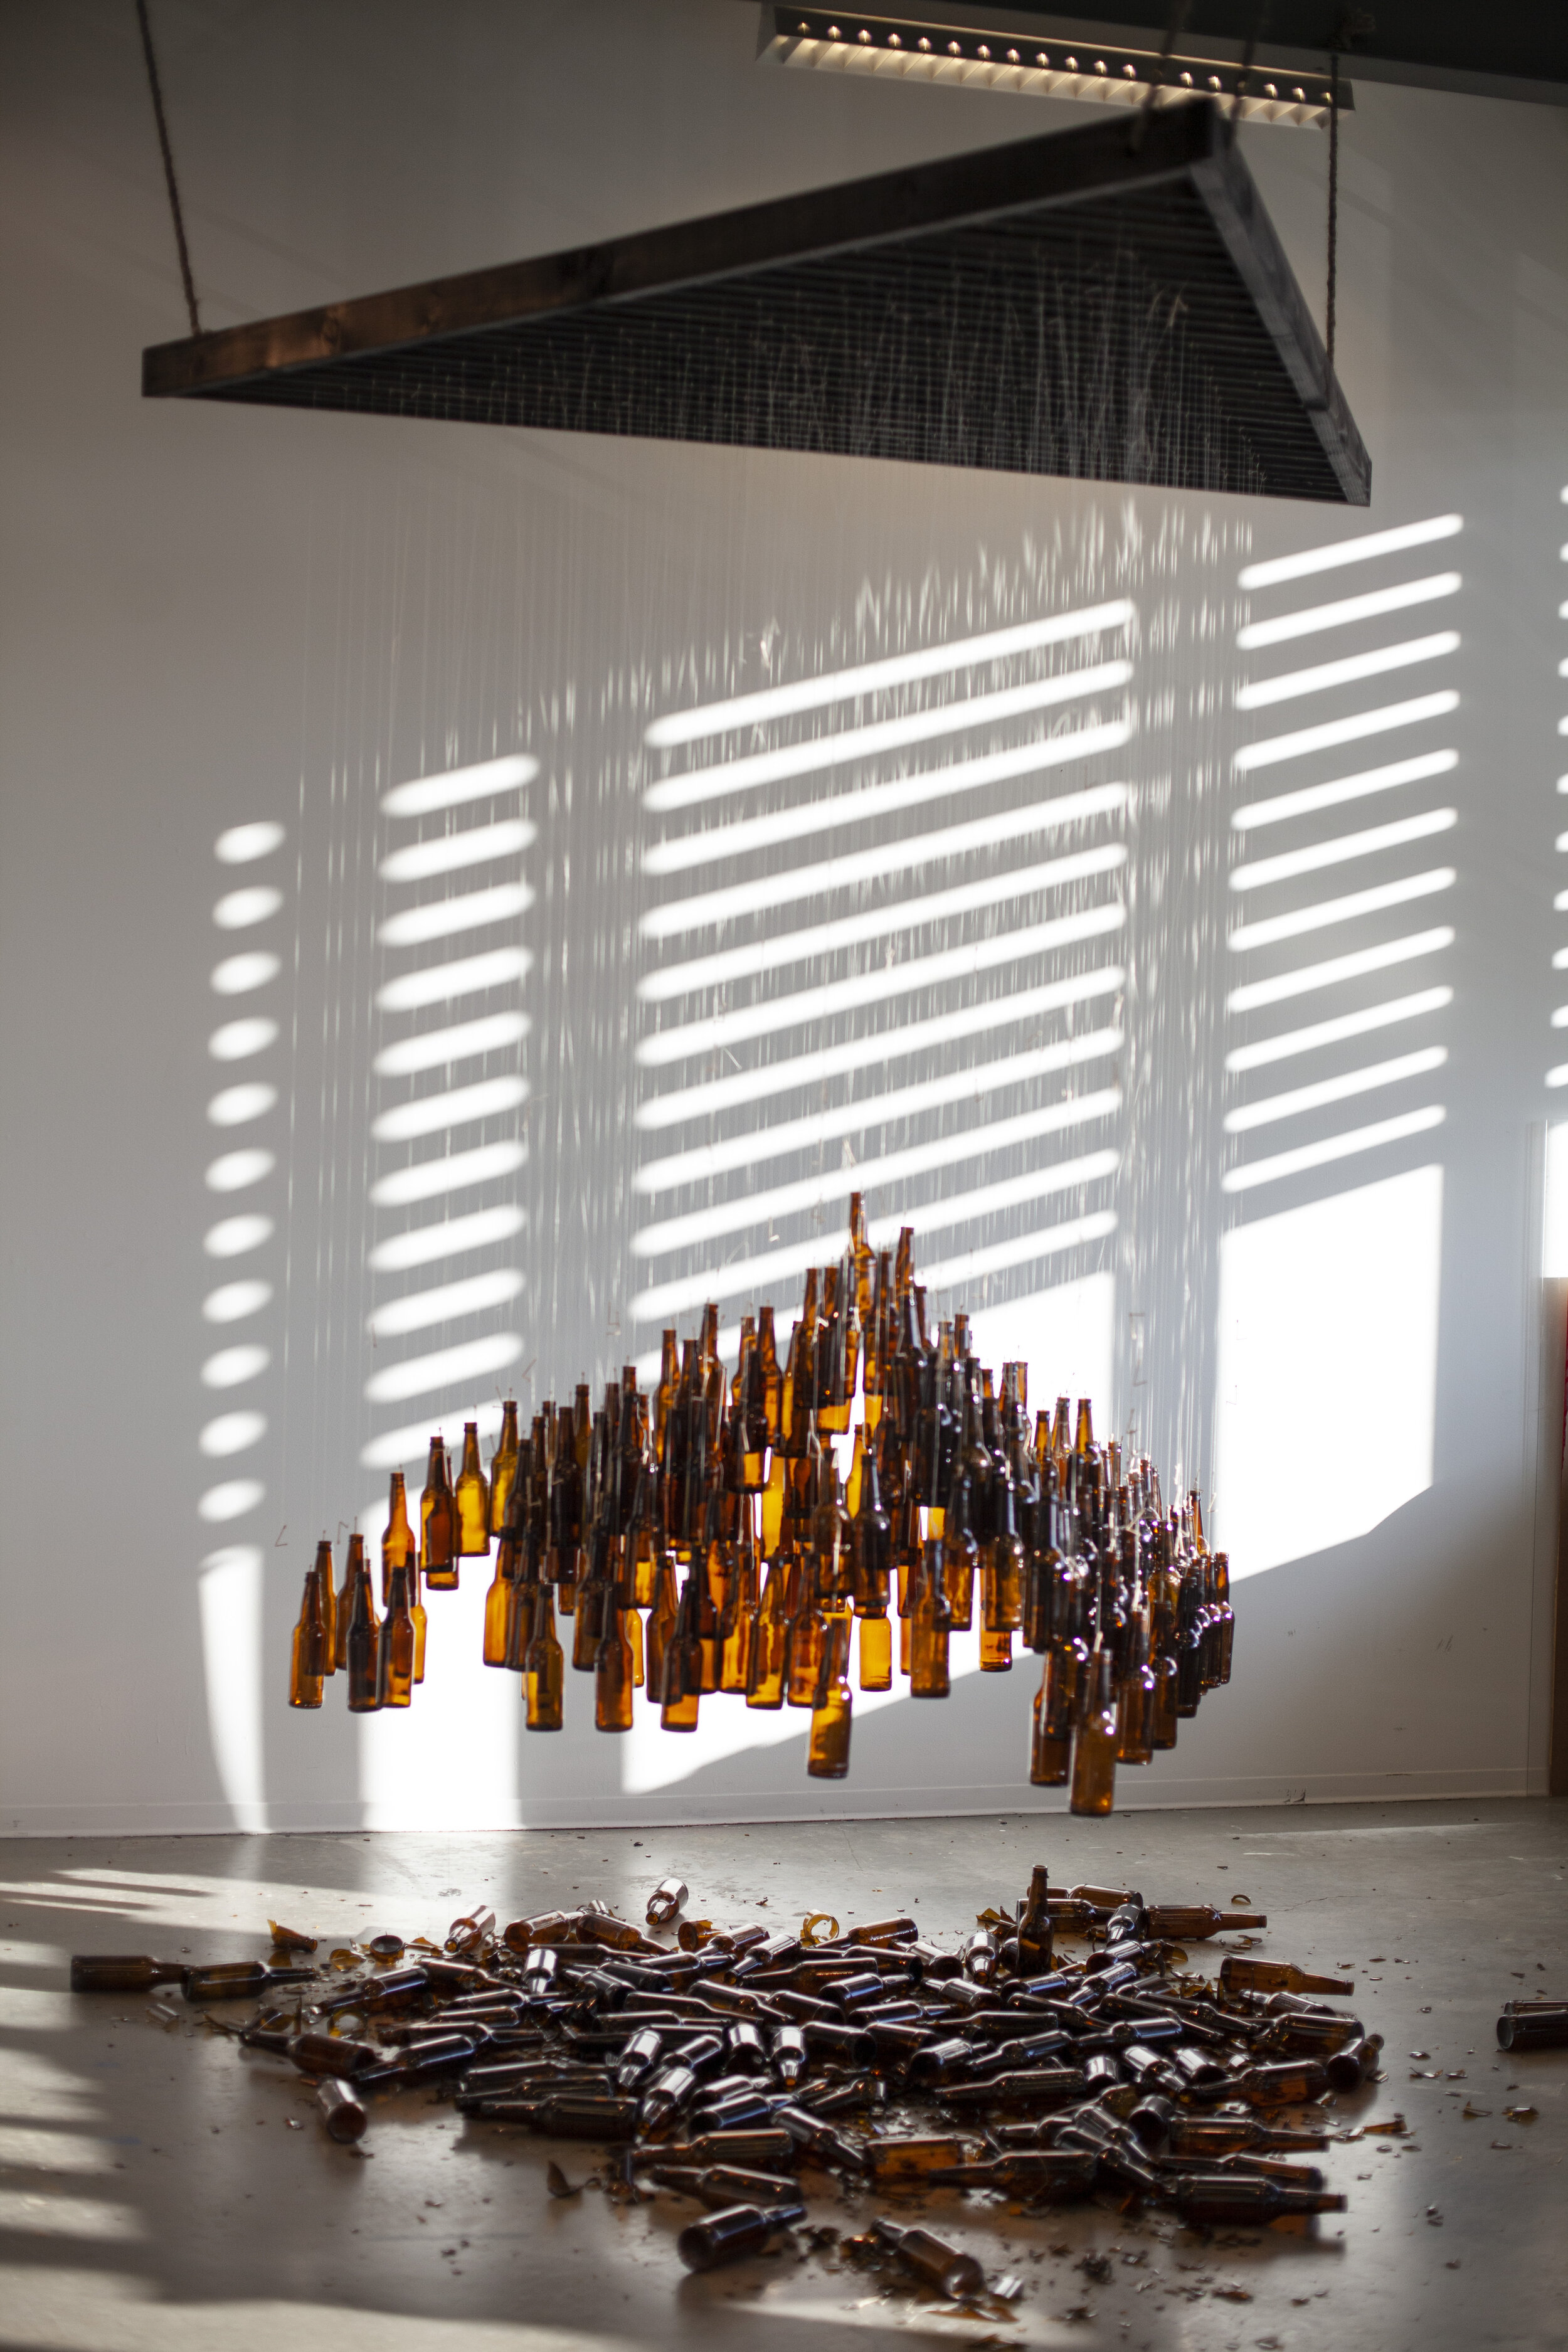  Anna Miller  HOURGLASS , 2019 Toothpicks, beer bottles, thread, wood, rope 180 x 108 inches (457 x 274 cm) 